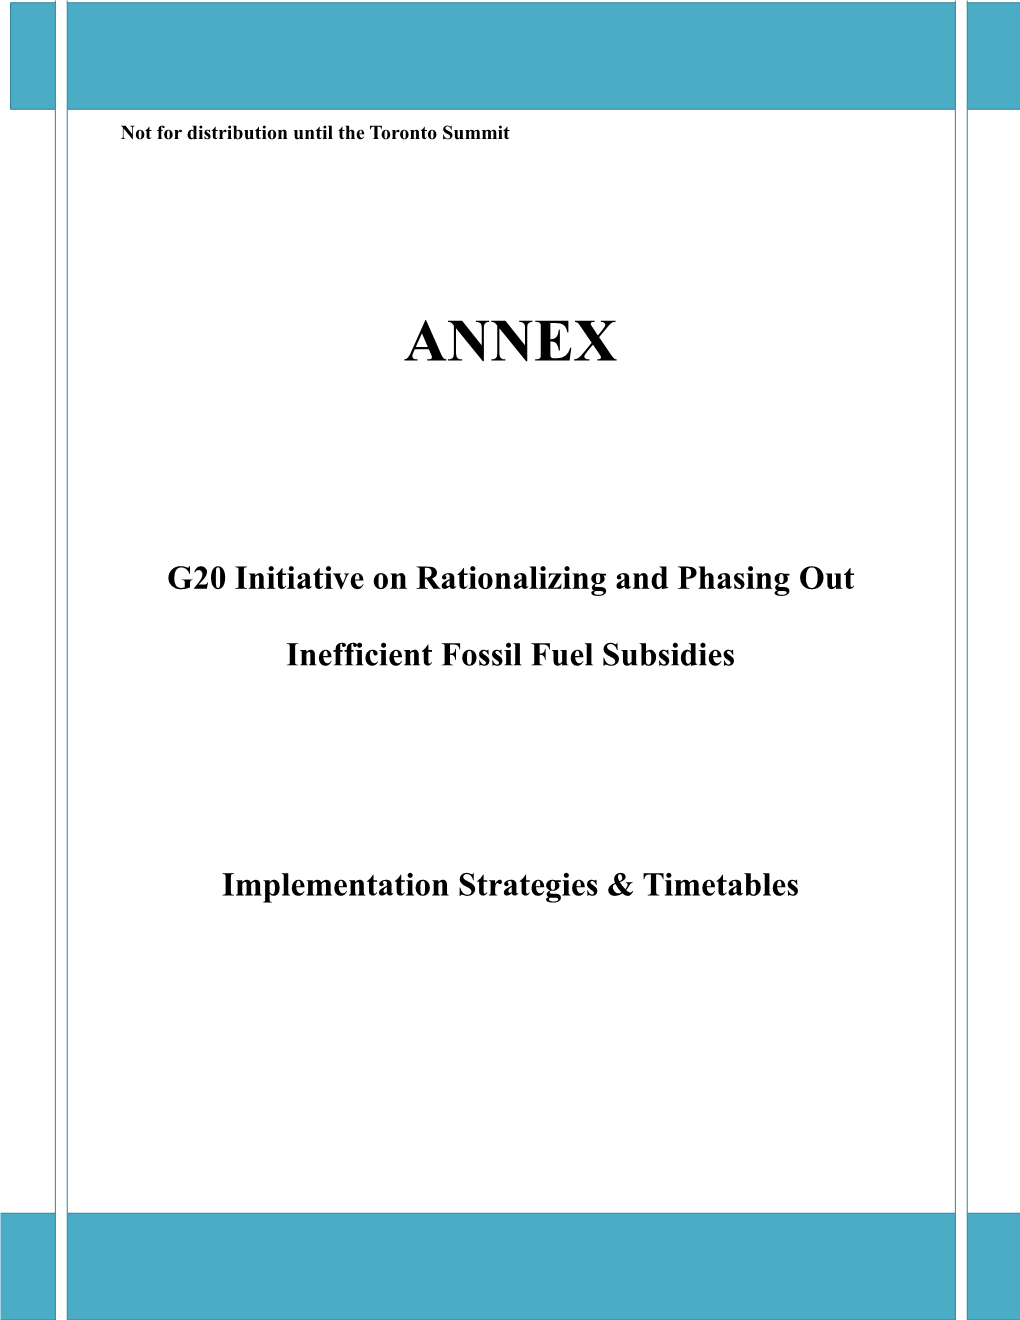 G20 Initiative on Rationalizing and Phasing out Inefficient Fossil Fuel